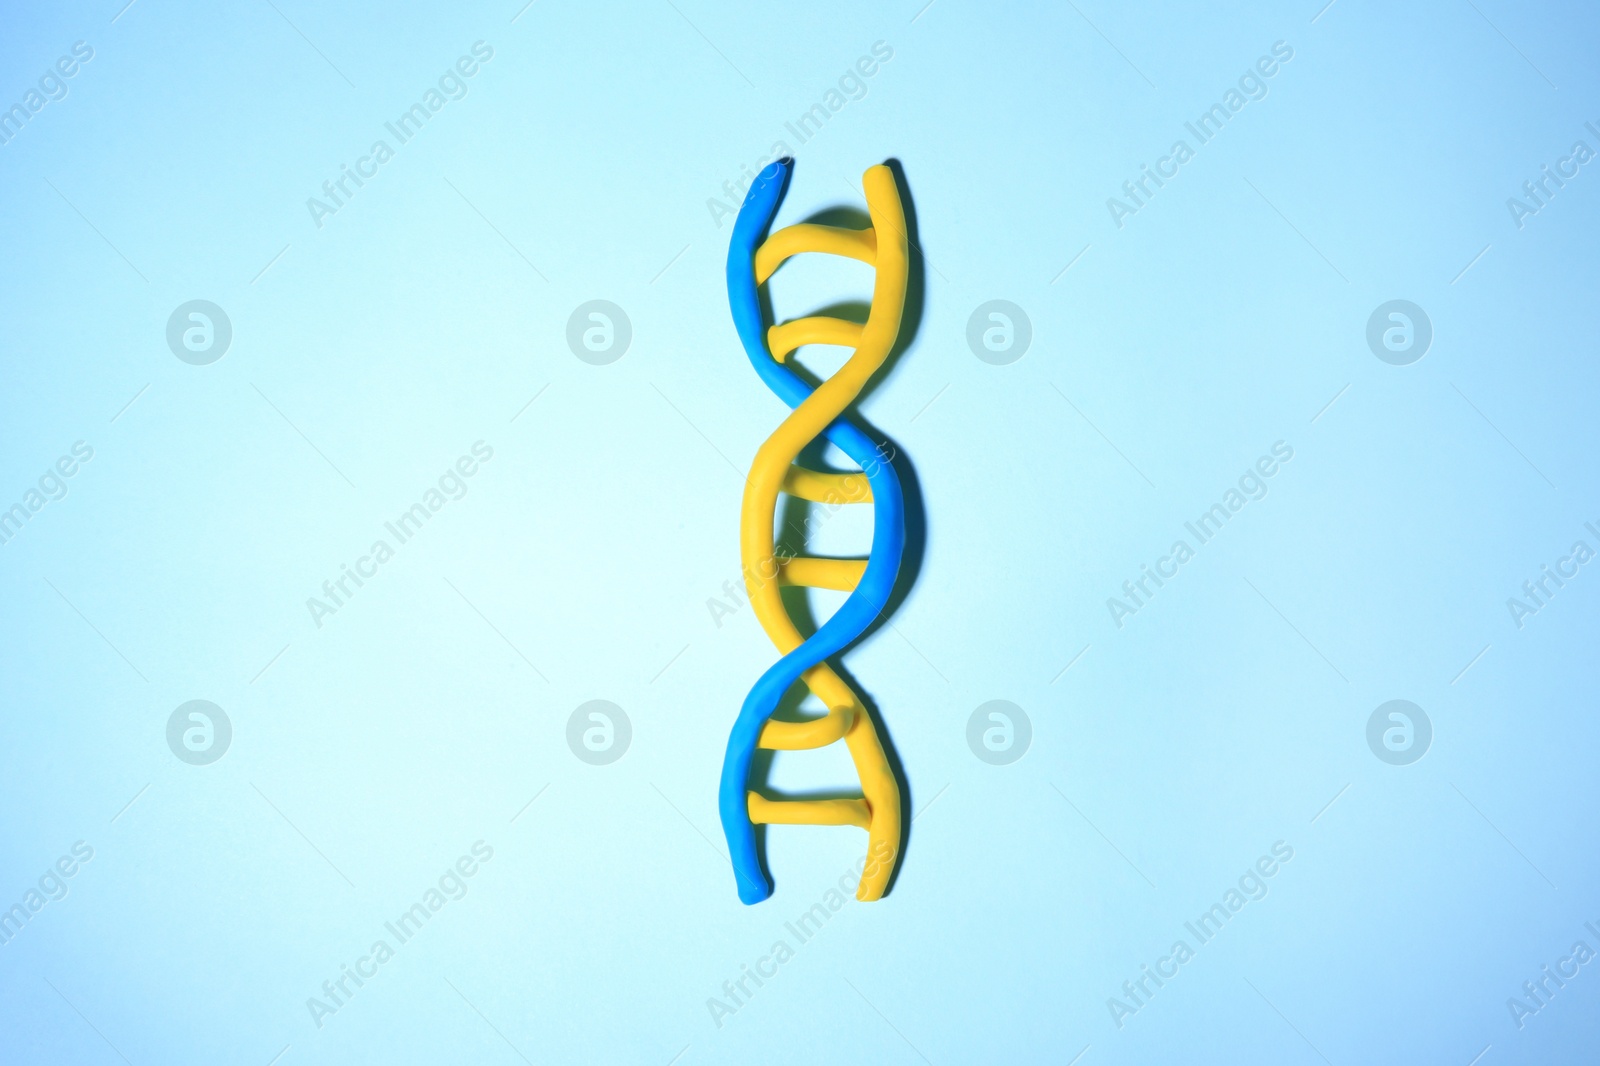 Photo of DNA molecule model made of colorful plasticine on light blue background, top view